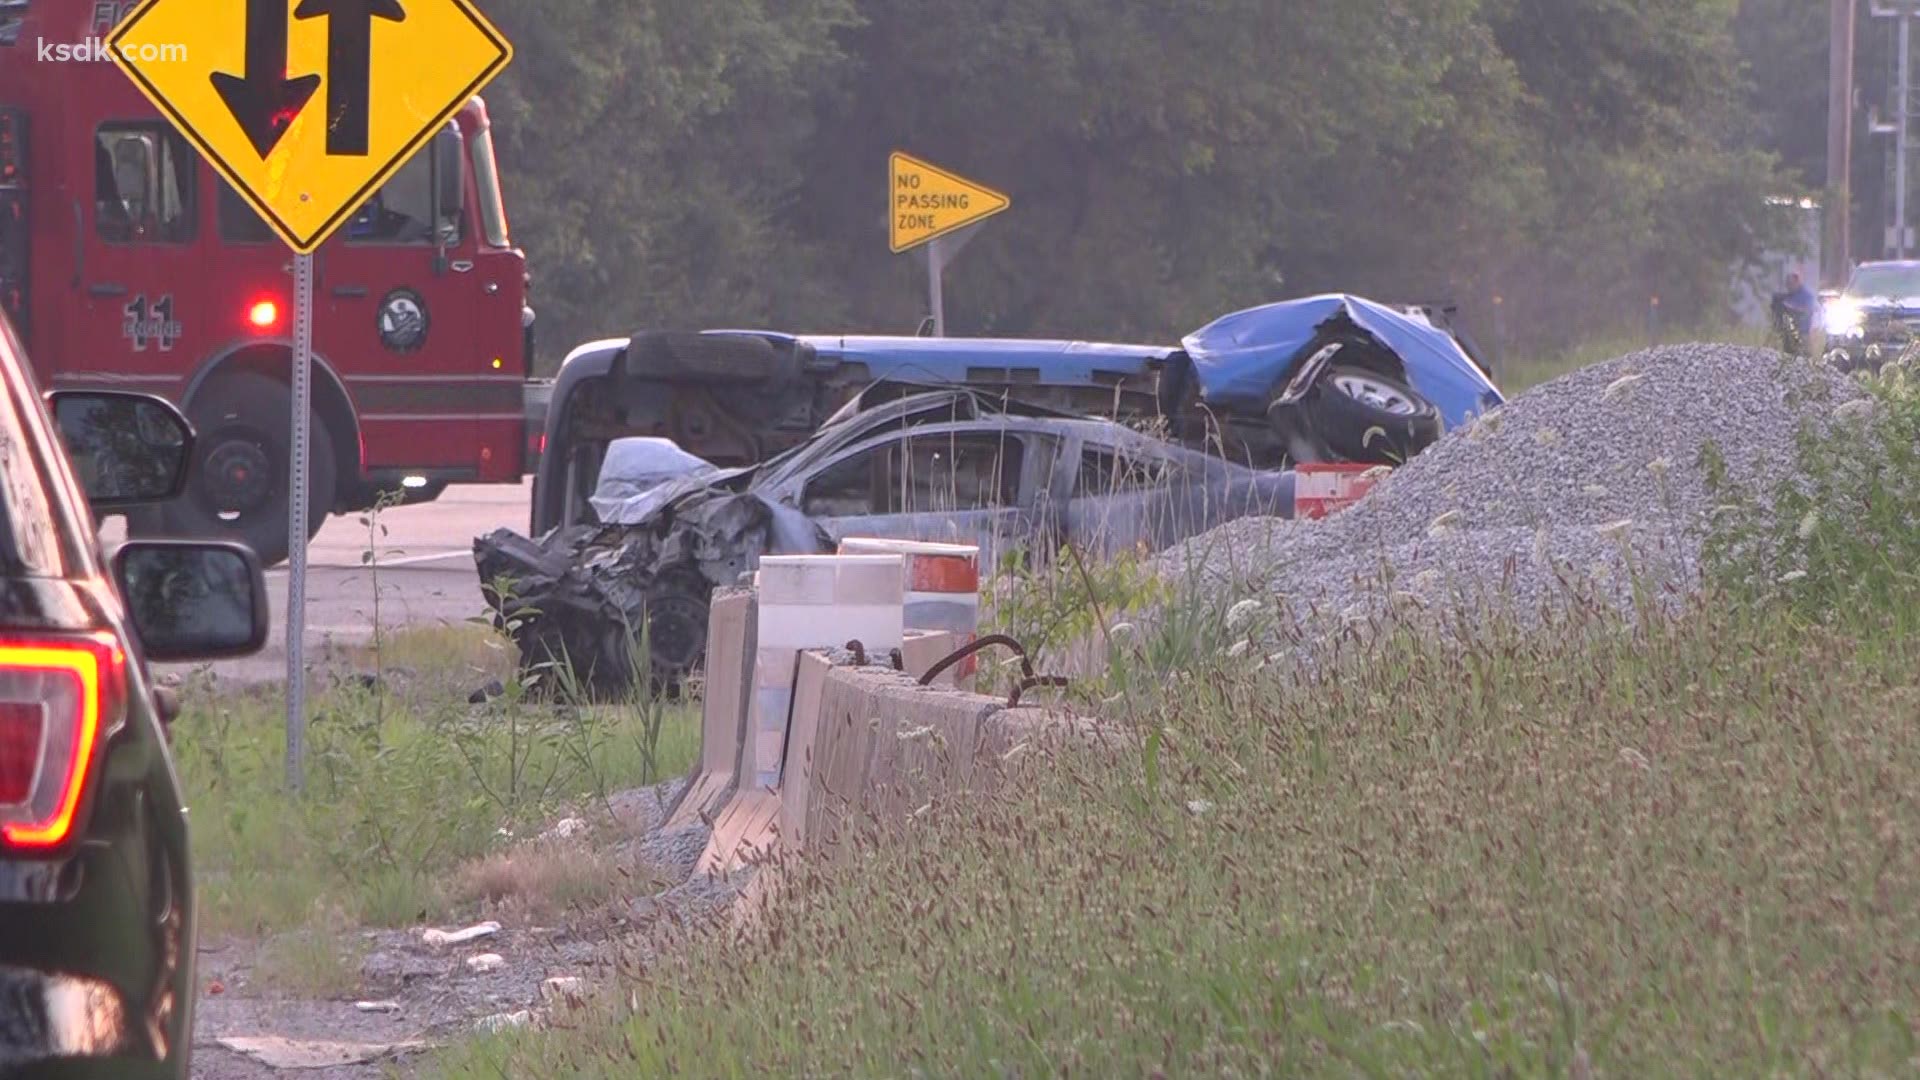 The Illinois State Highway Patrol confirmed one person was killed in a crash on Illinois 111